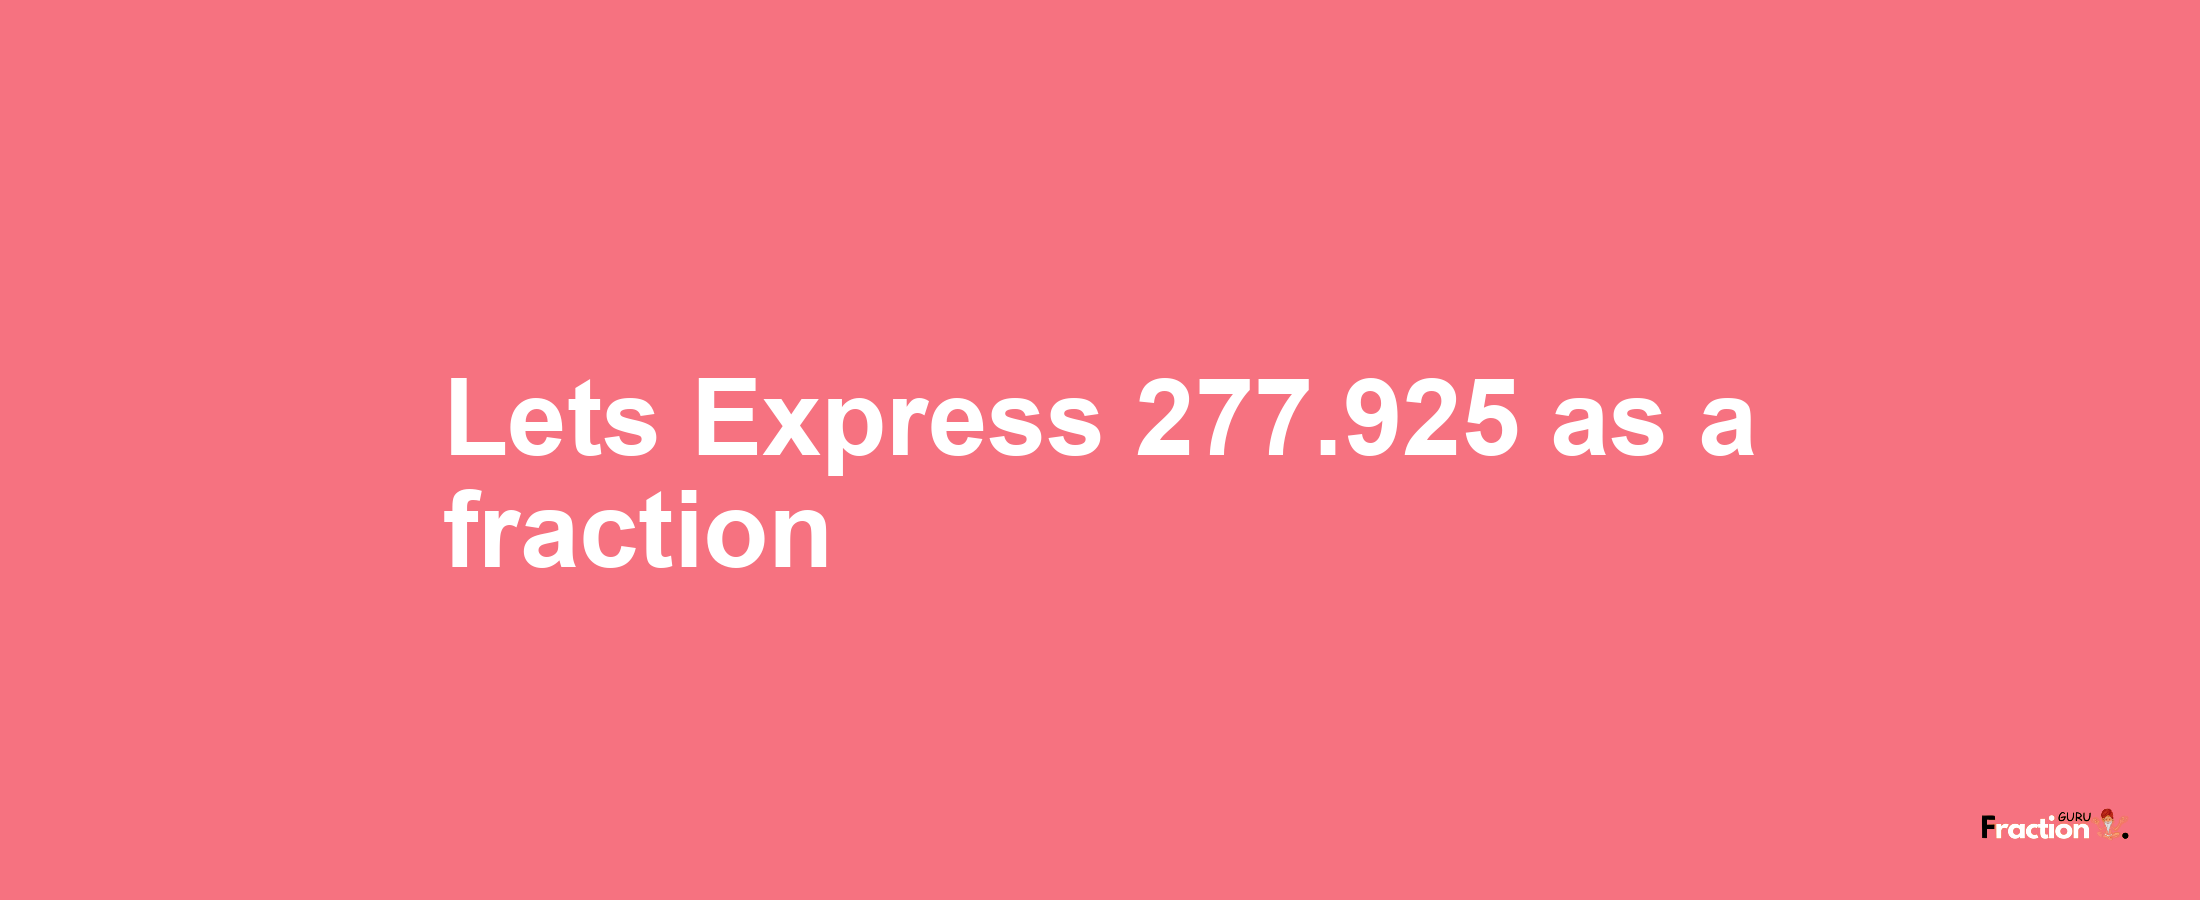 Lets Express 277.925 as afraction